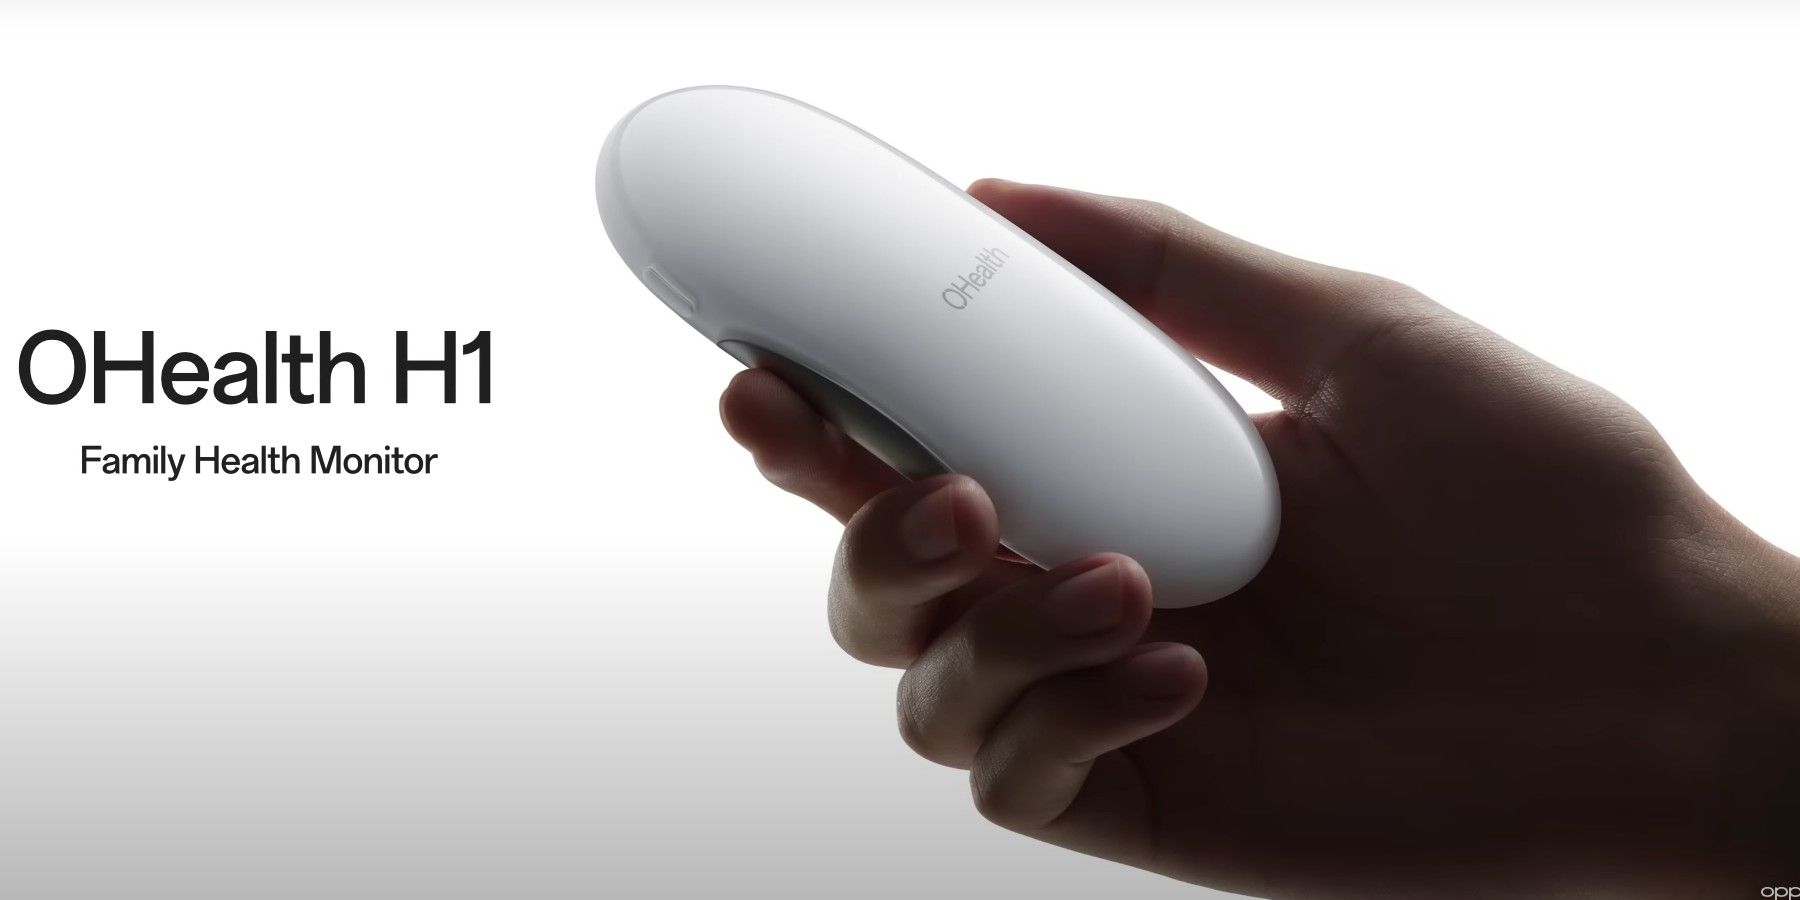 A hand holding the Oppo OHealth H1 Family Monitor